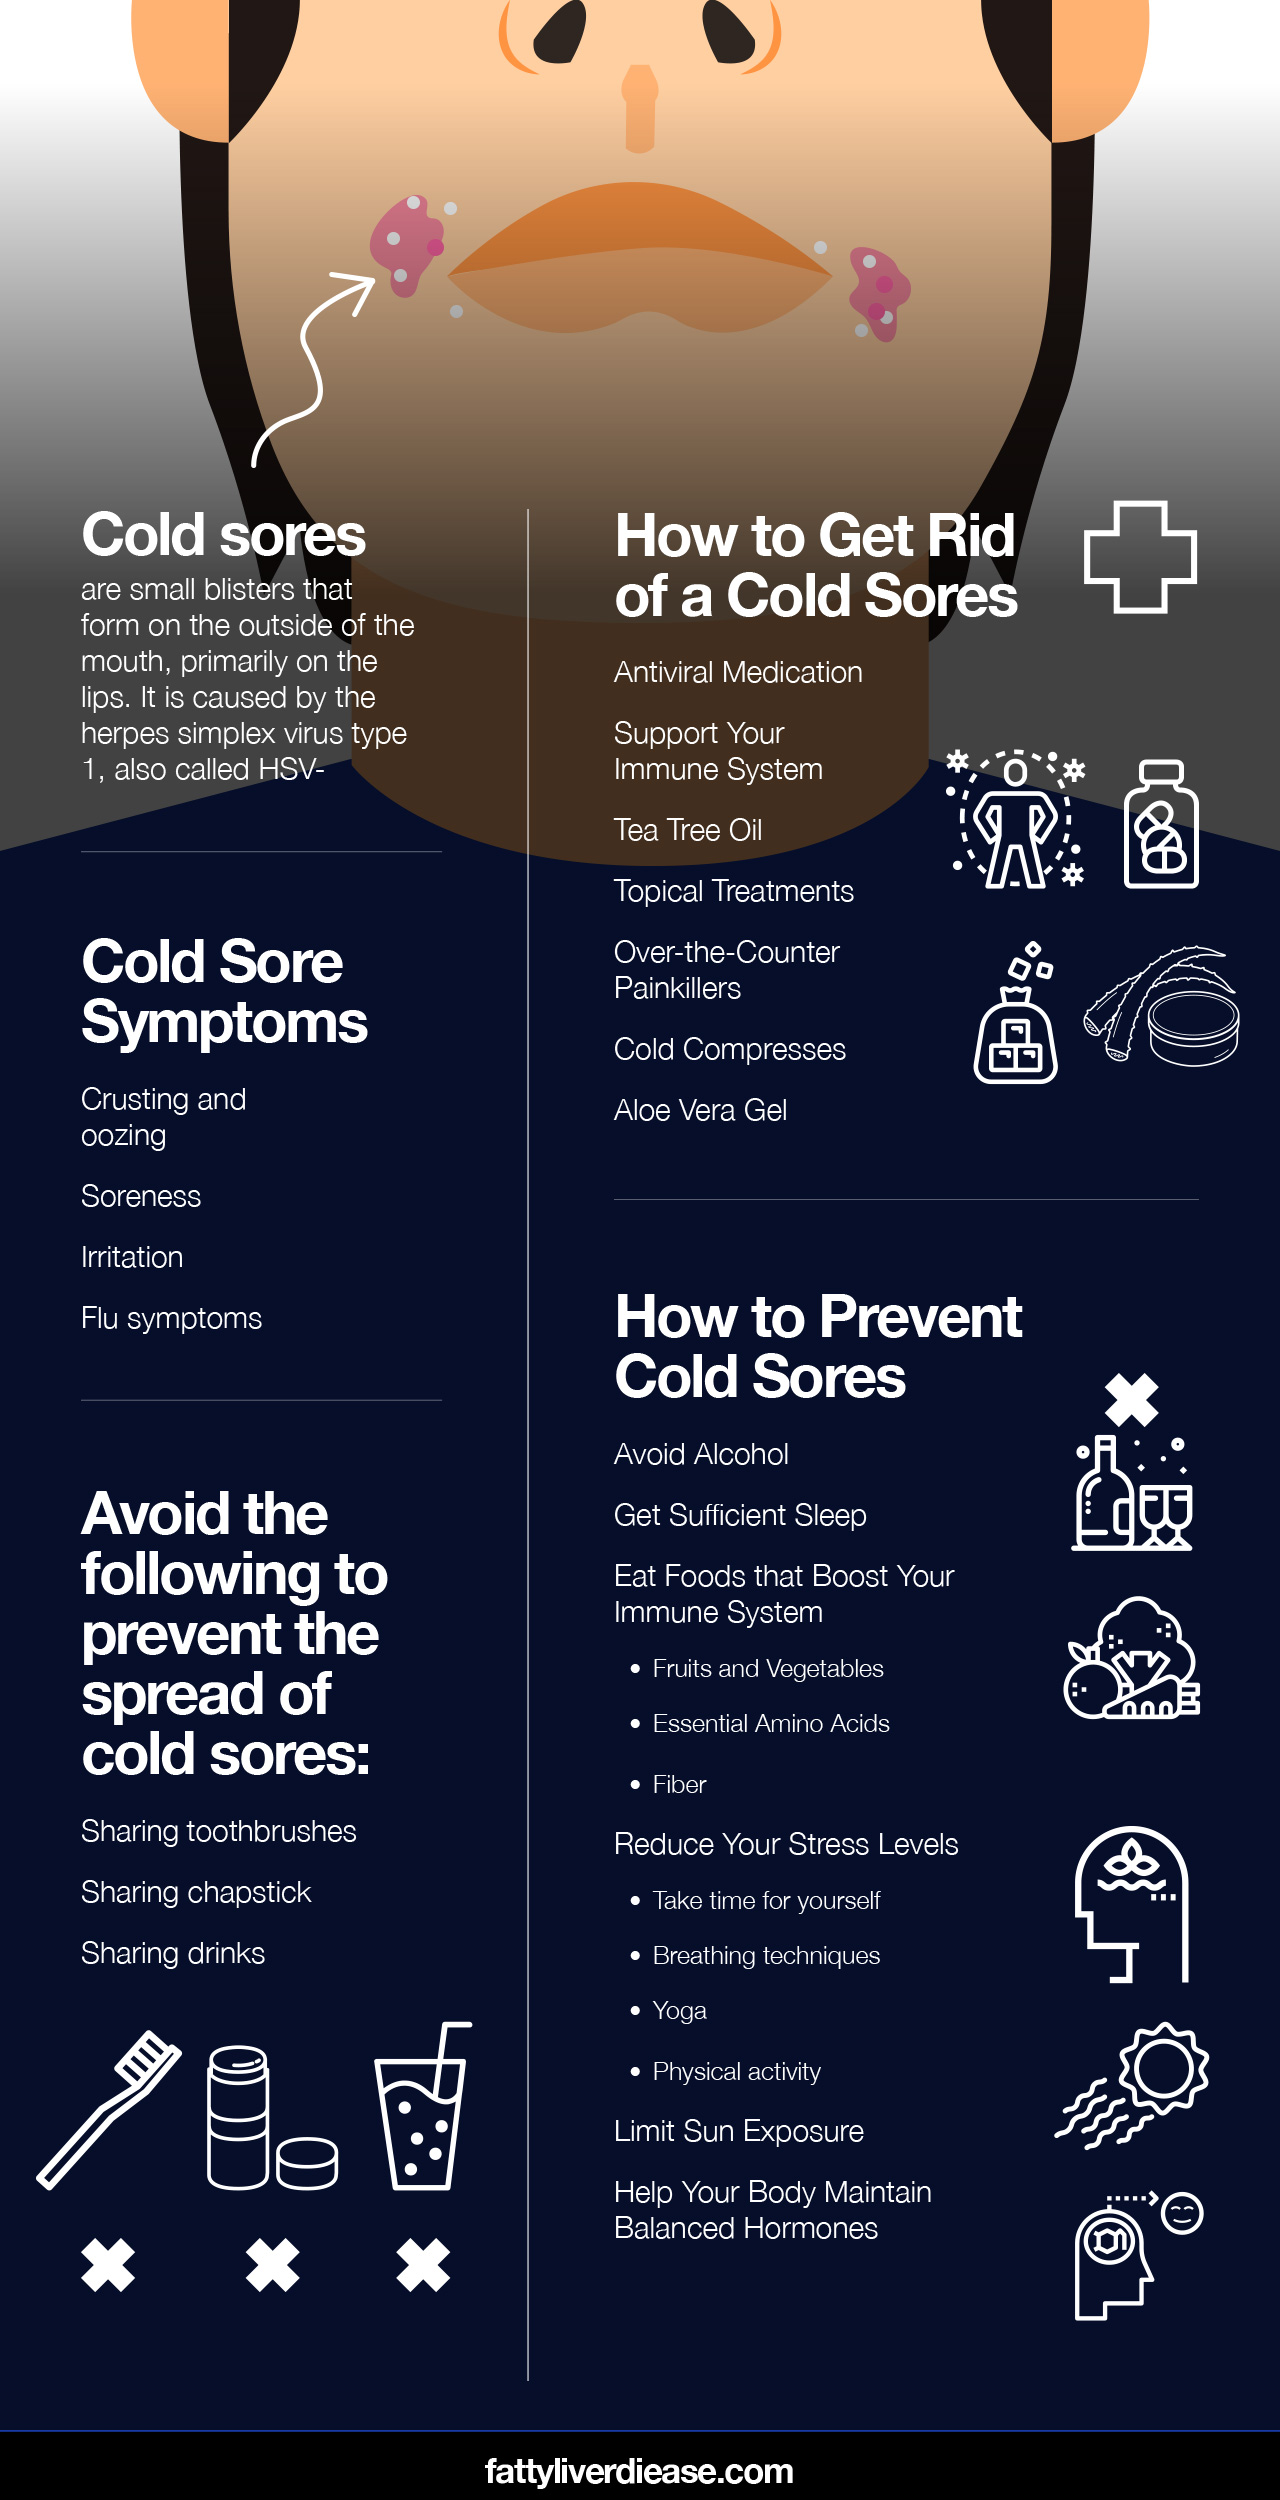 how to get rid of a cold sore